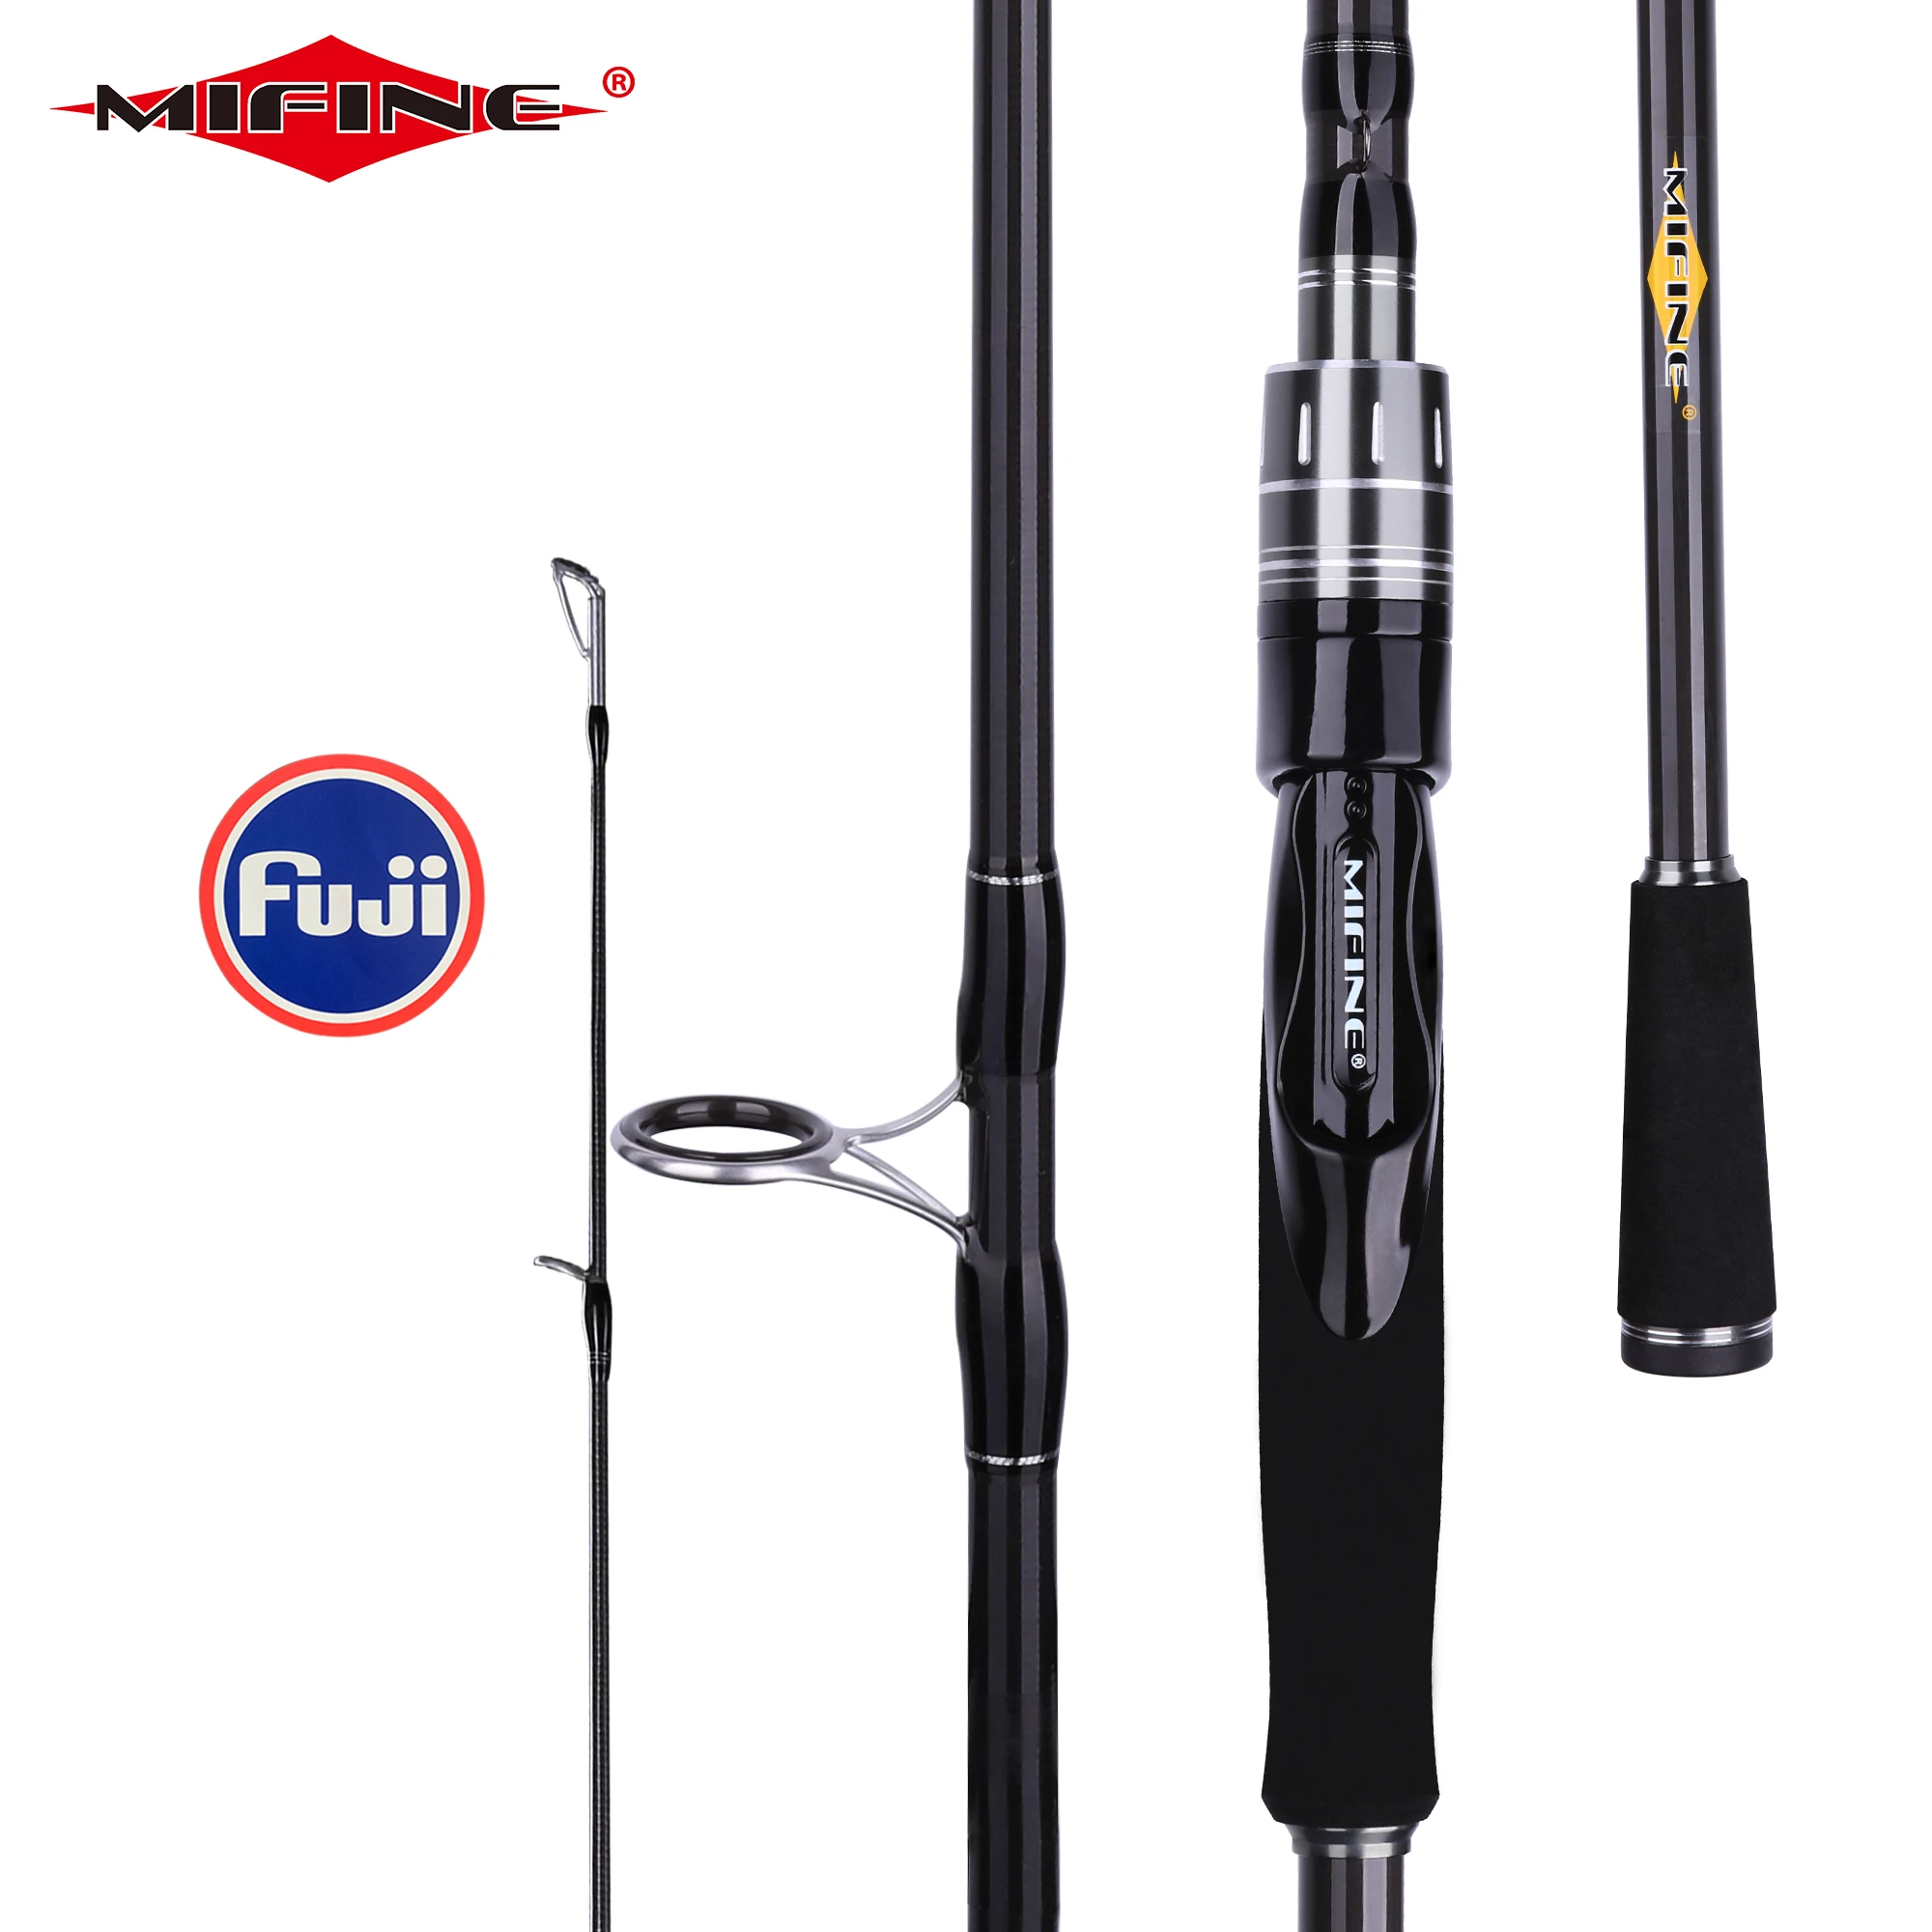 MIFINE MAXIMUS Spinning Bait Casting Lure Fishing Rod 30T Carbon FUJI Guides 3-50gML/M/MH Contain 1.68m To 3.00m Travel Pole